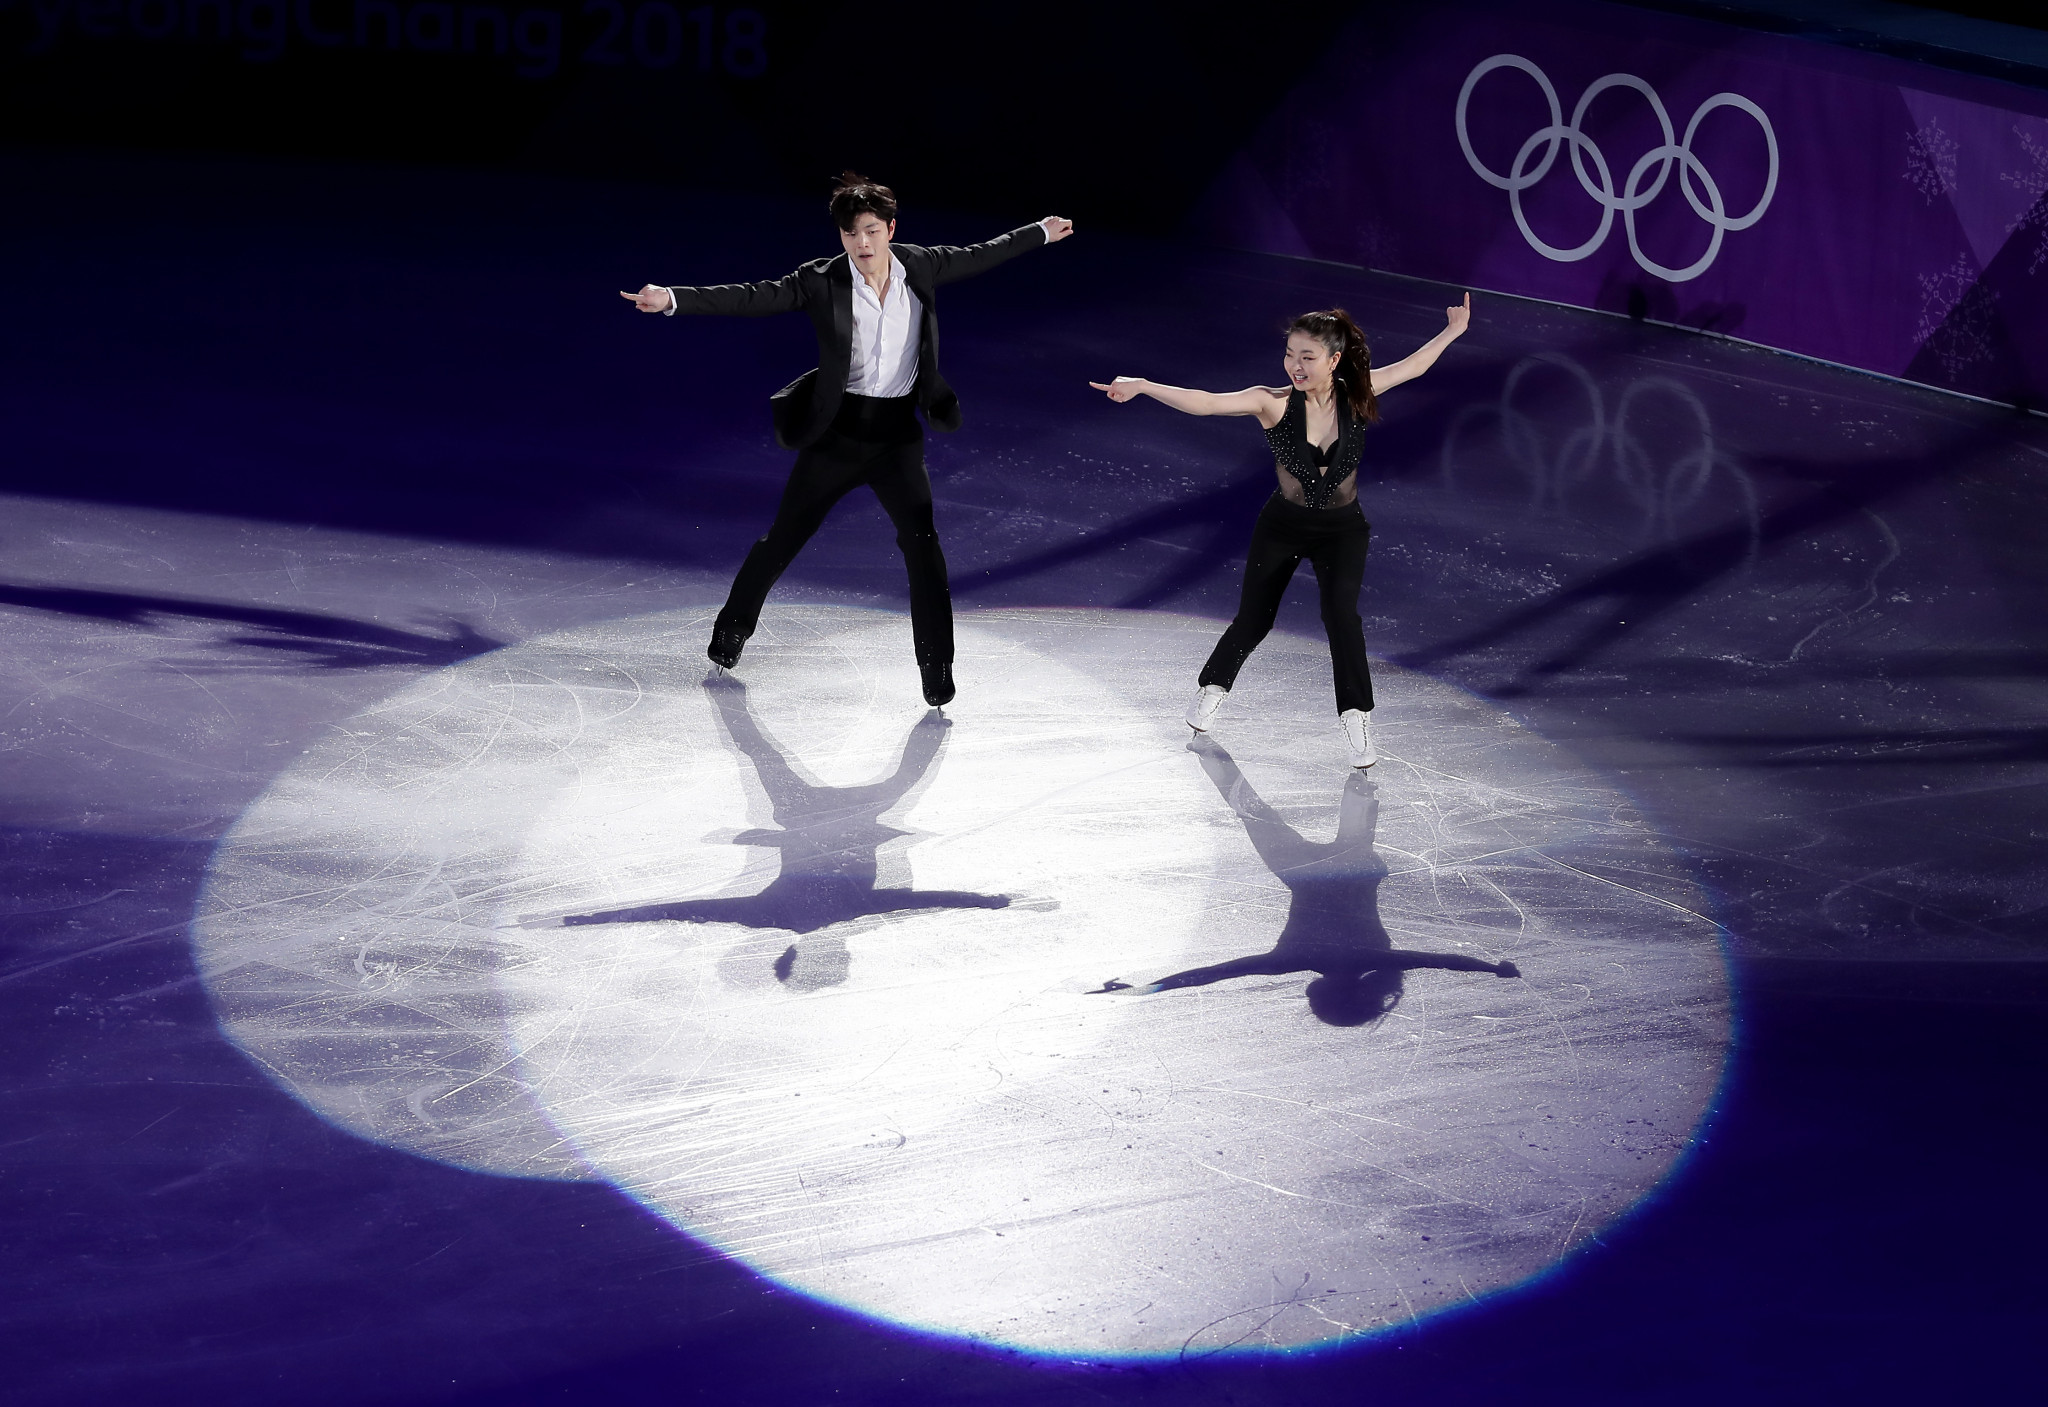 Alex and Maia Shibutani won two Olympic bronze medals at Pyeongchang 2018 ©Getty Images